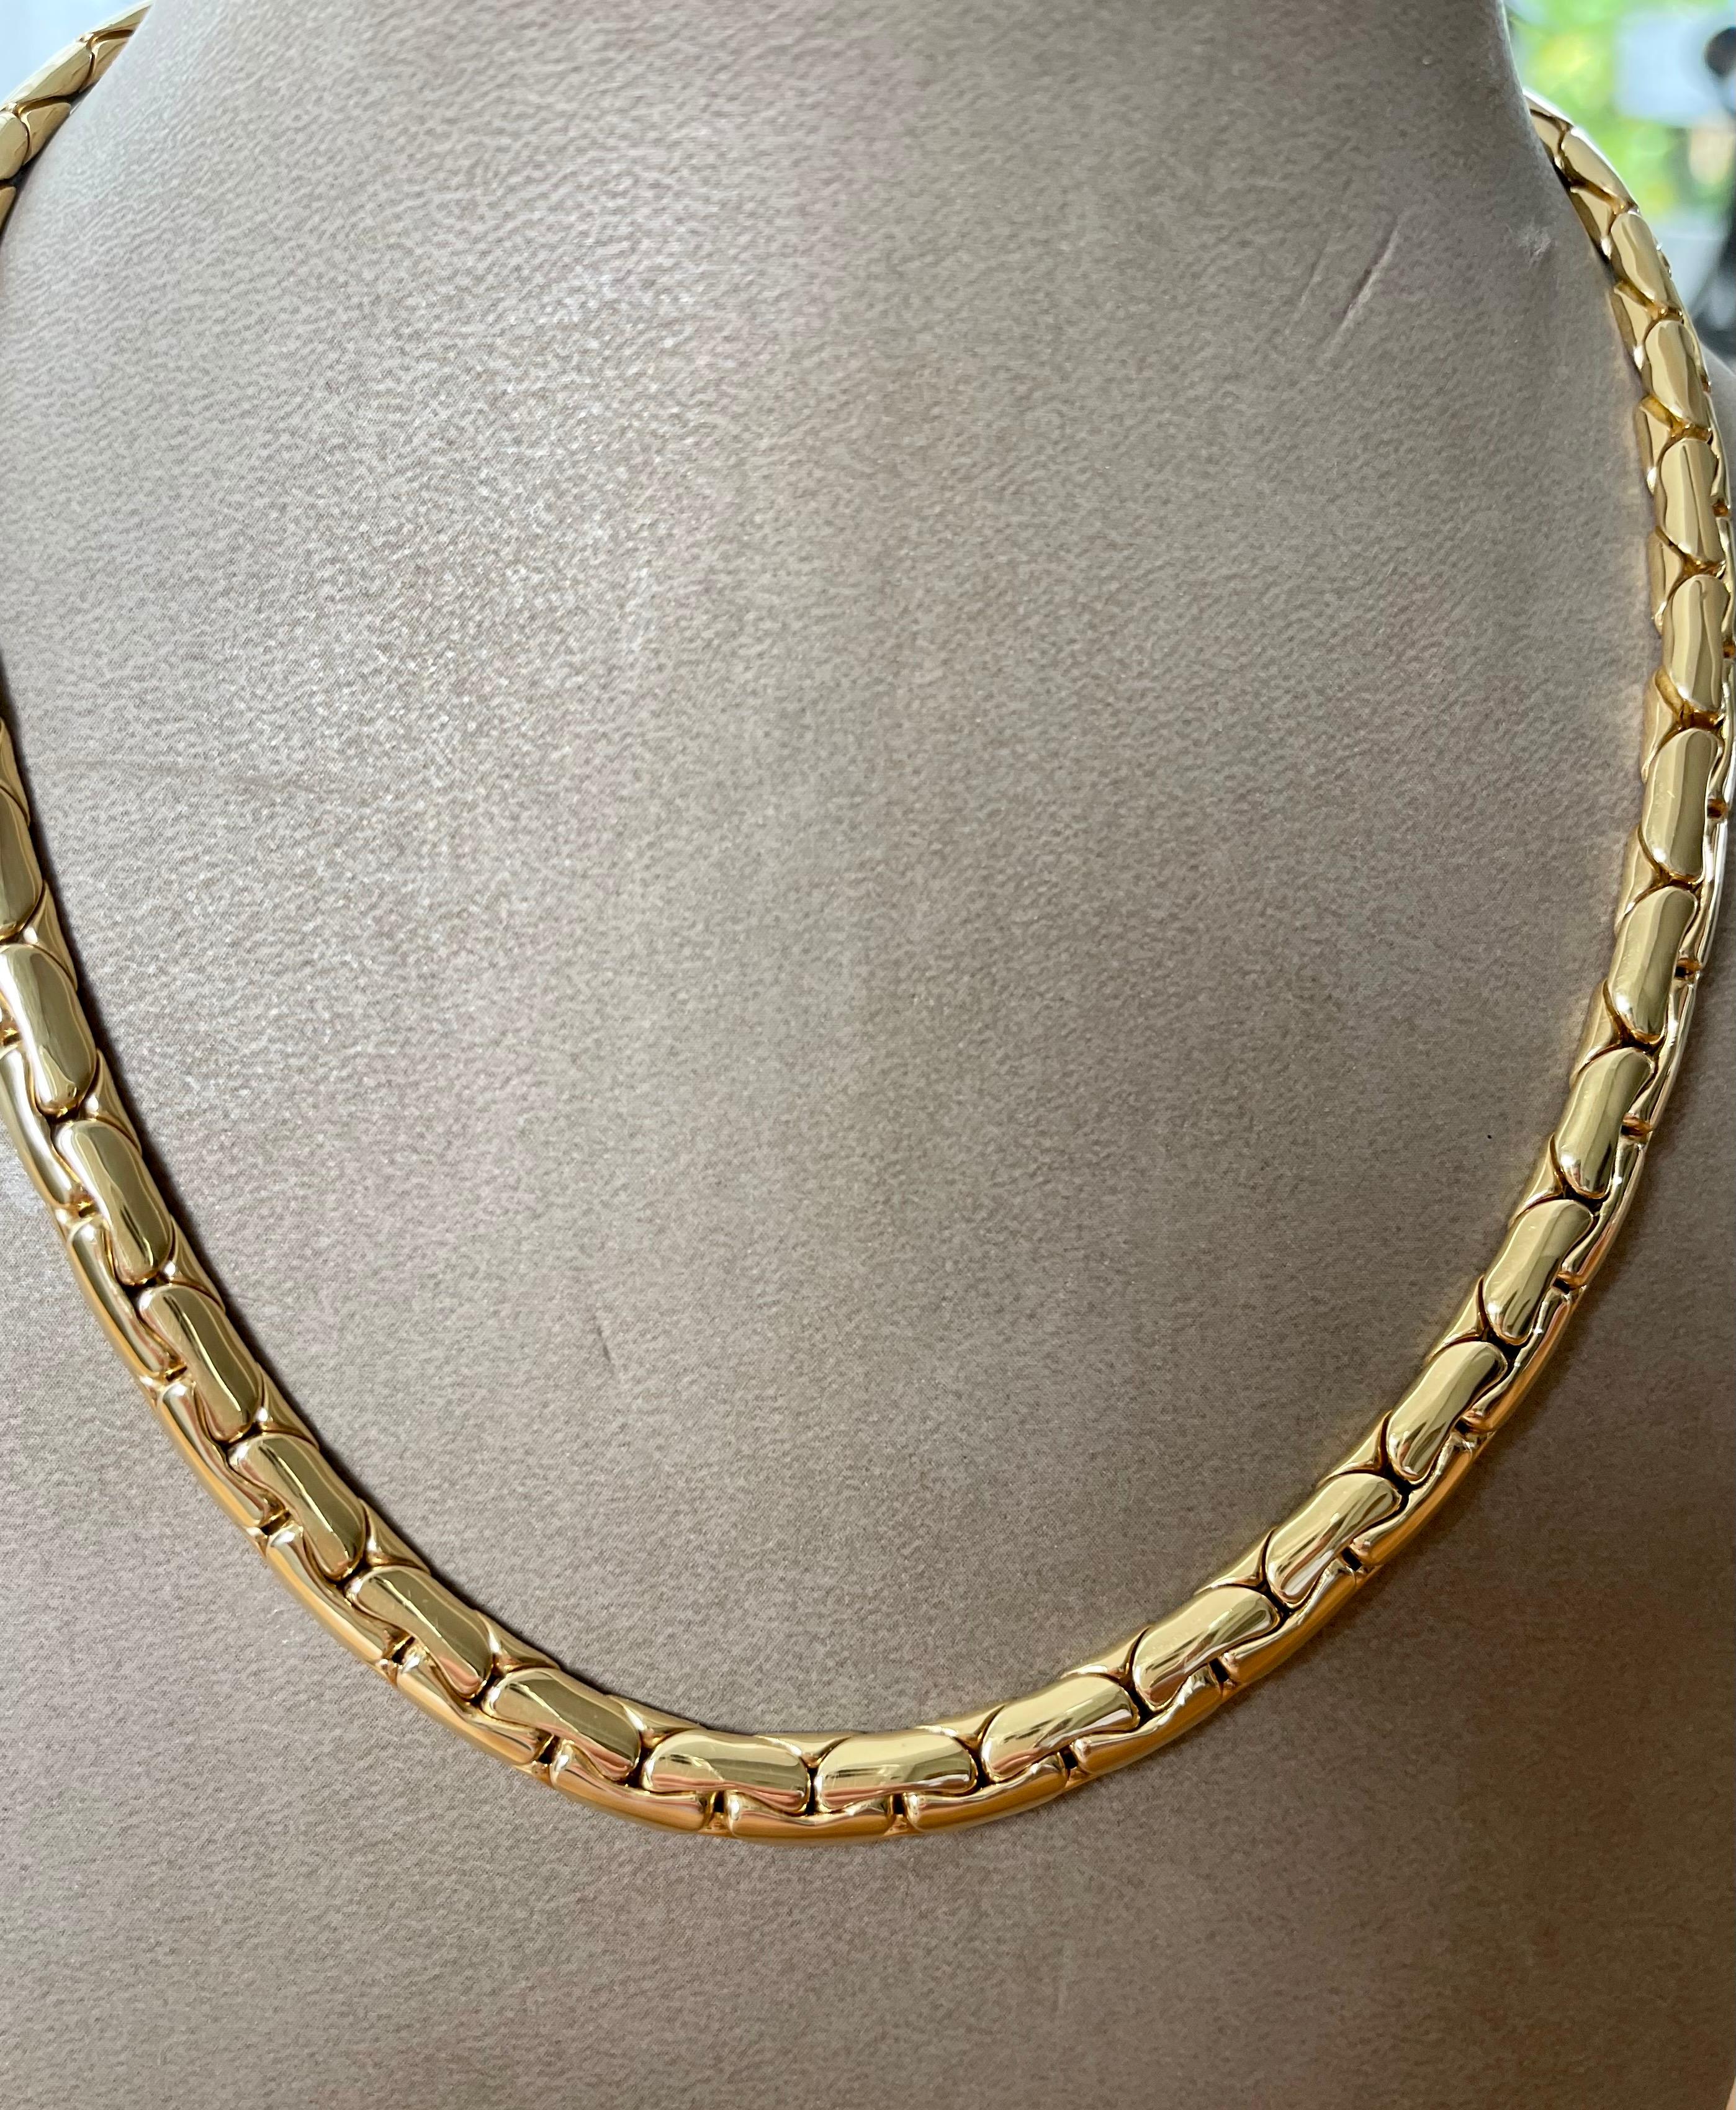 Handmade 18 K Yellow Gold Necklace by Gübelin Lucerne For Sale 1